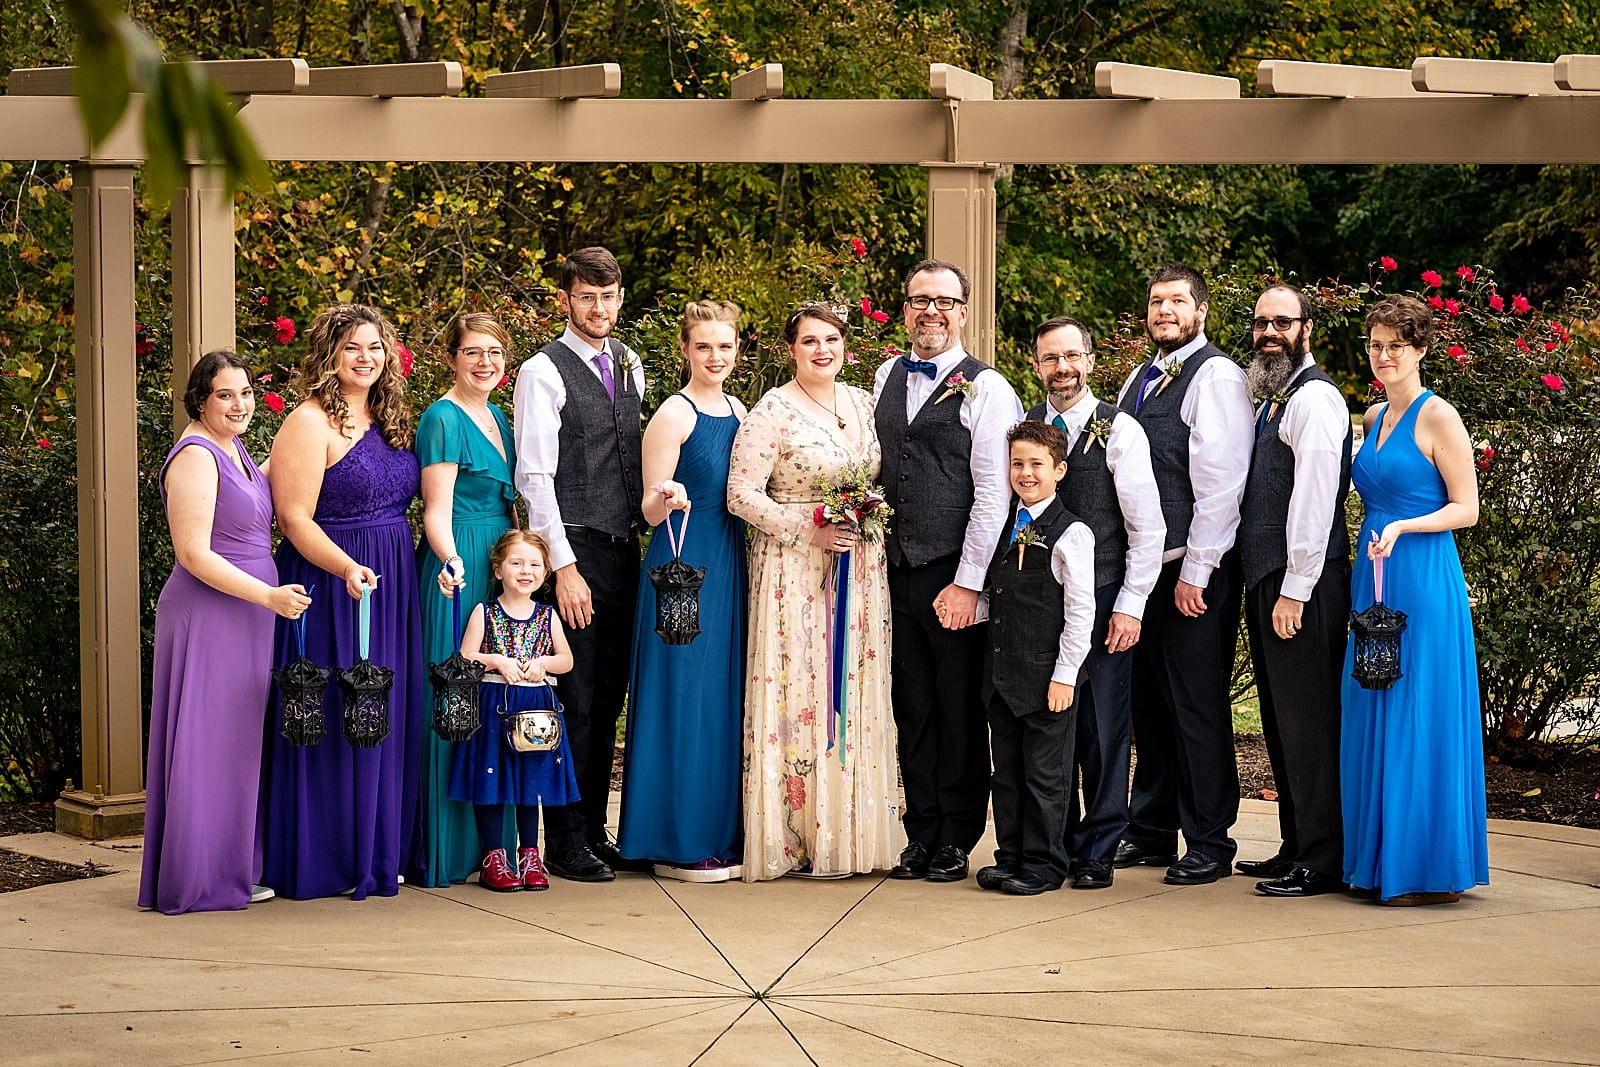 Colorful wedding party inspiration, attire by Azazie, bride's gown by Needle & Thread